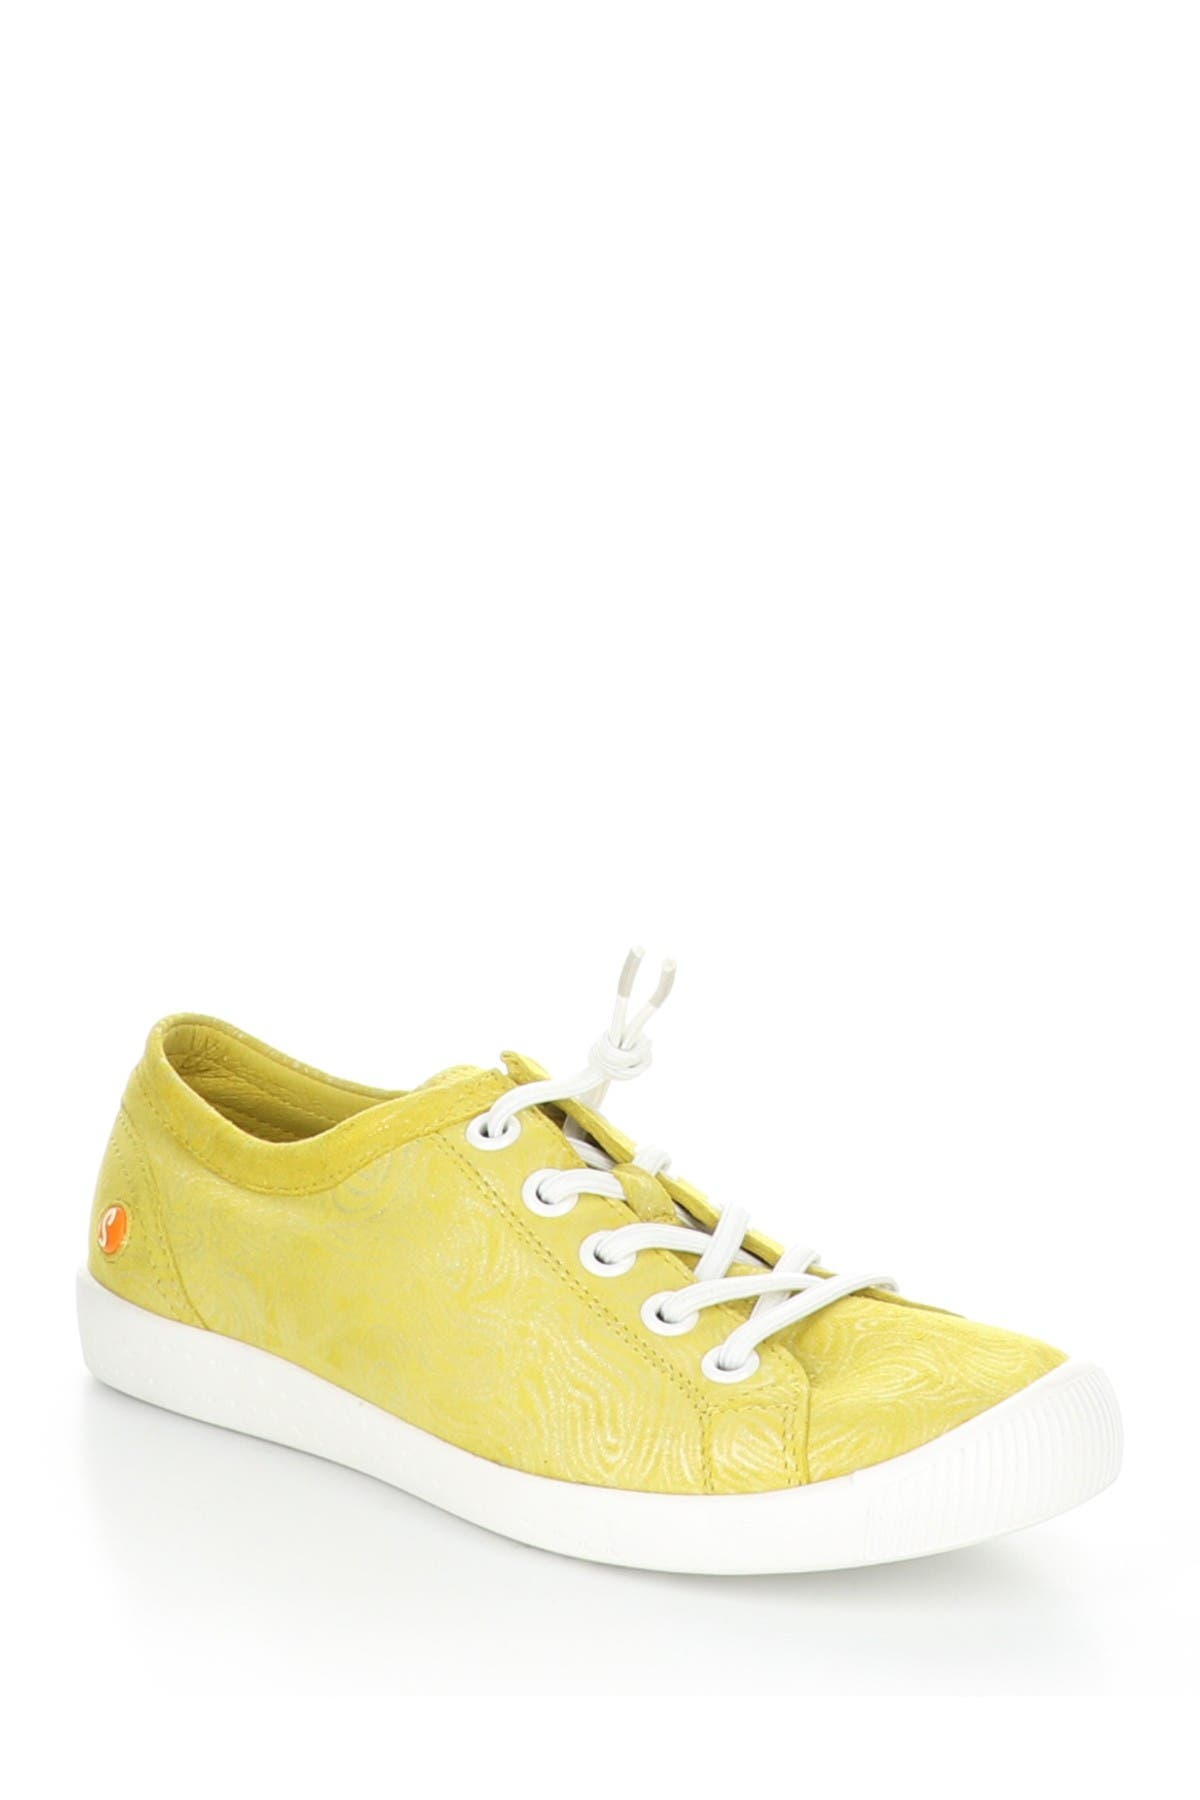 015 Yellow Suede Cur